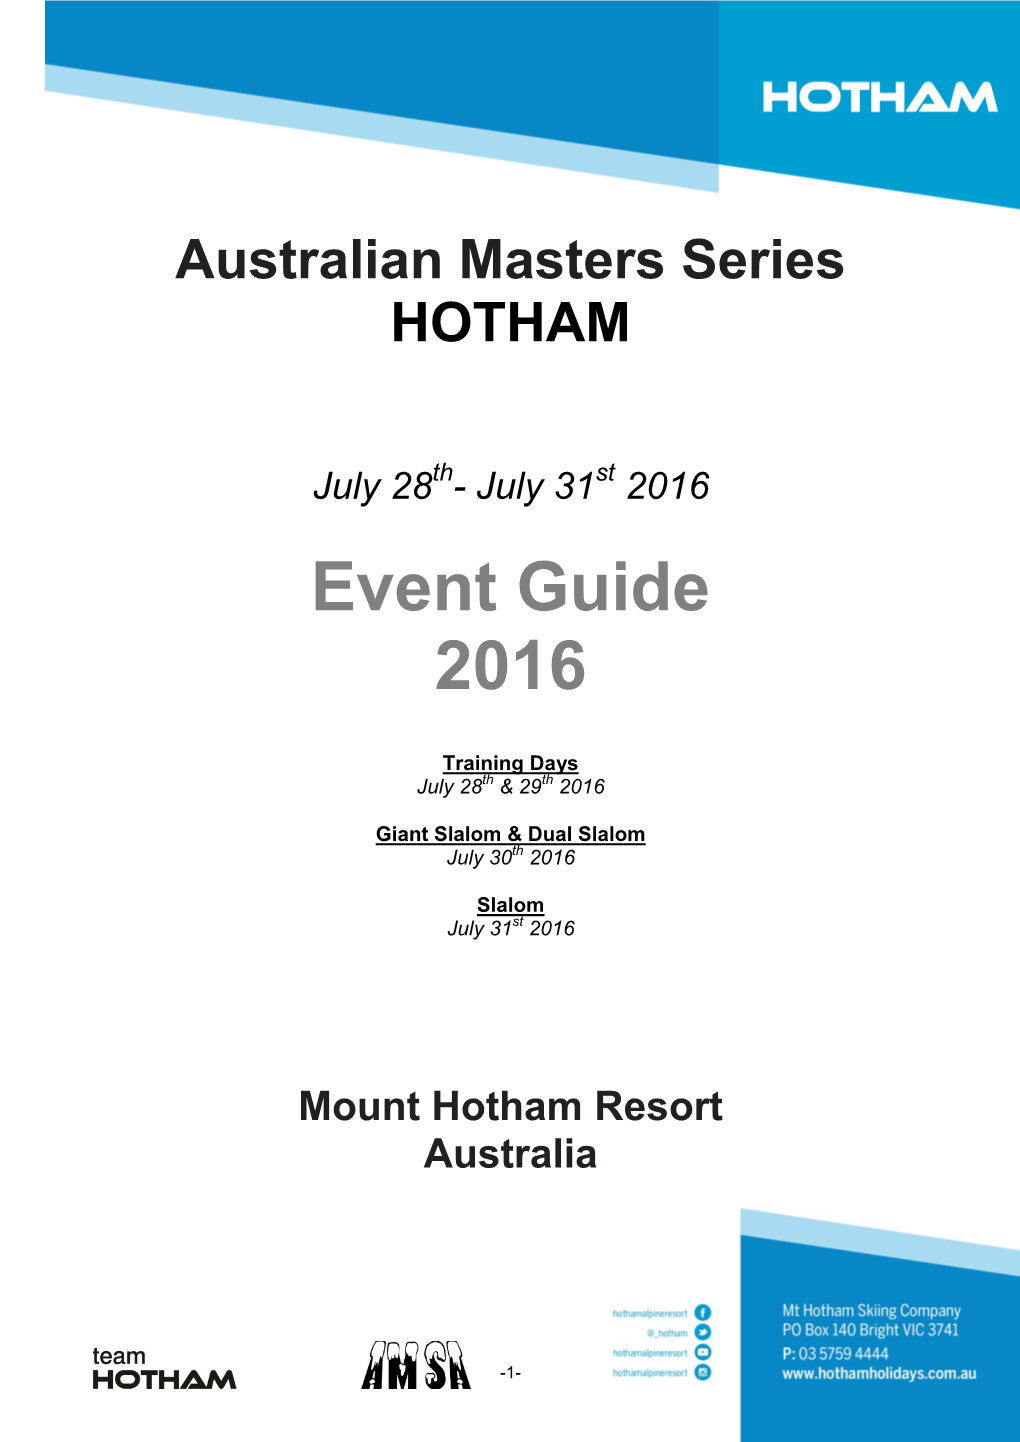 Event Guide 2016